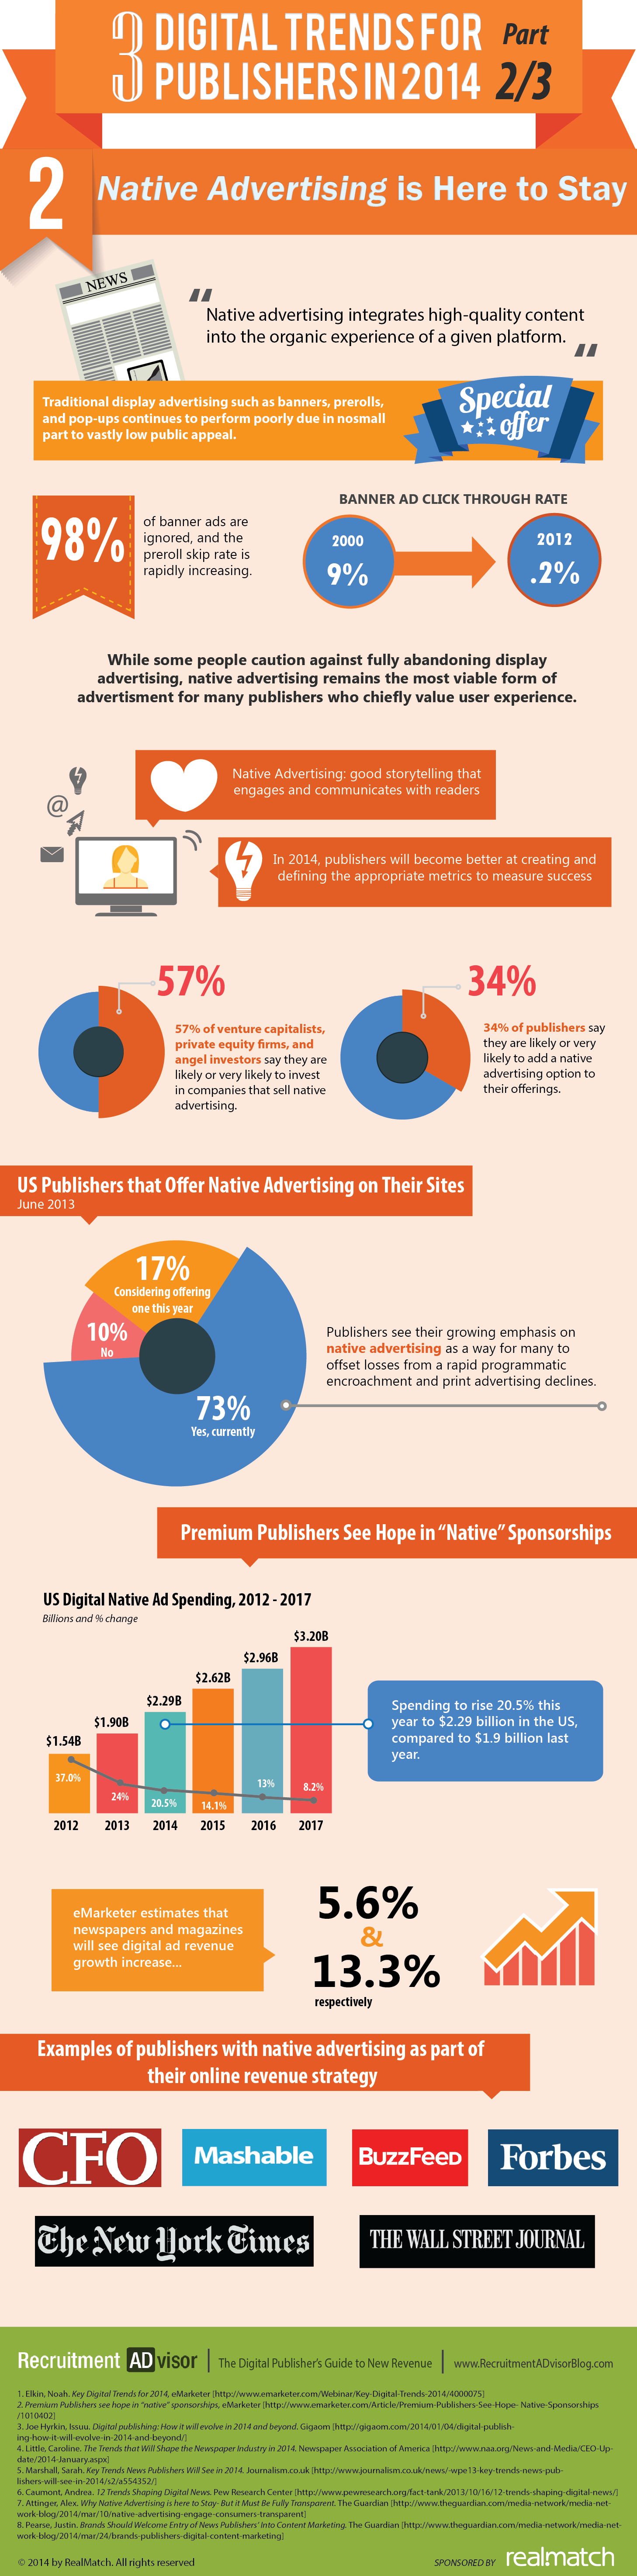 3 Digital Trends For Publishers in 2014 [Infographic] Native Advertising